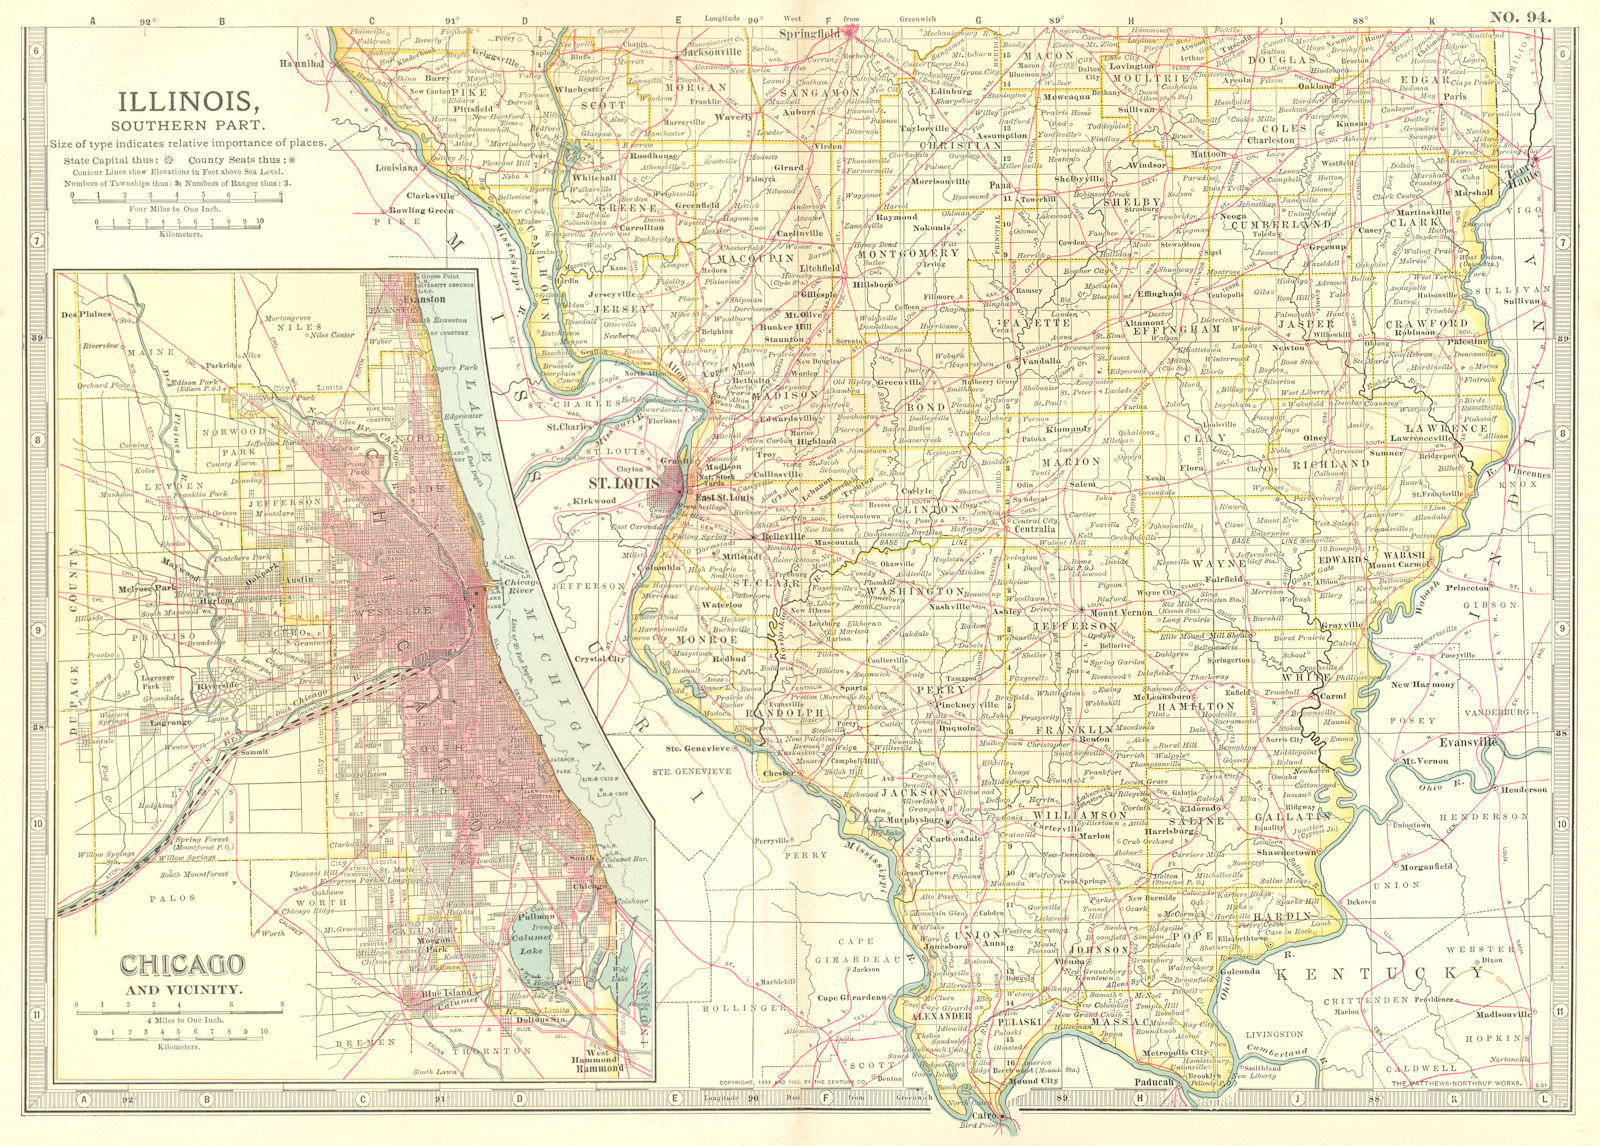 ILLINOIS SOUTH. Showing counties. Inset Chicago & area. Britannica. 1903 map